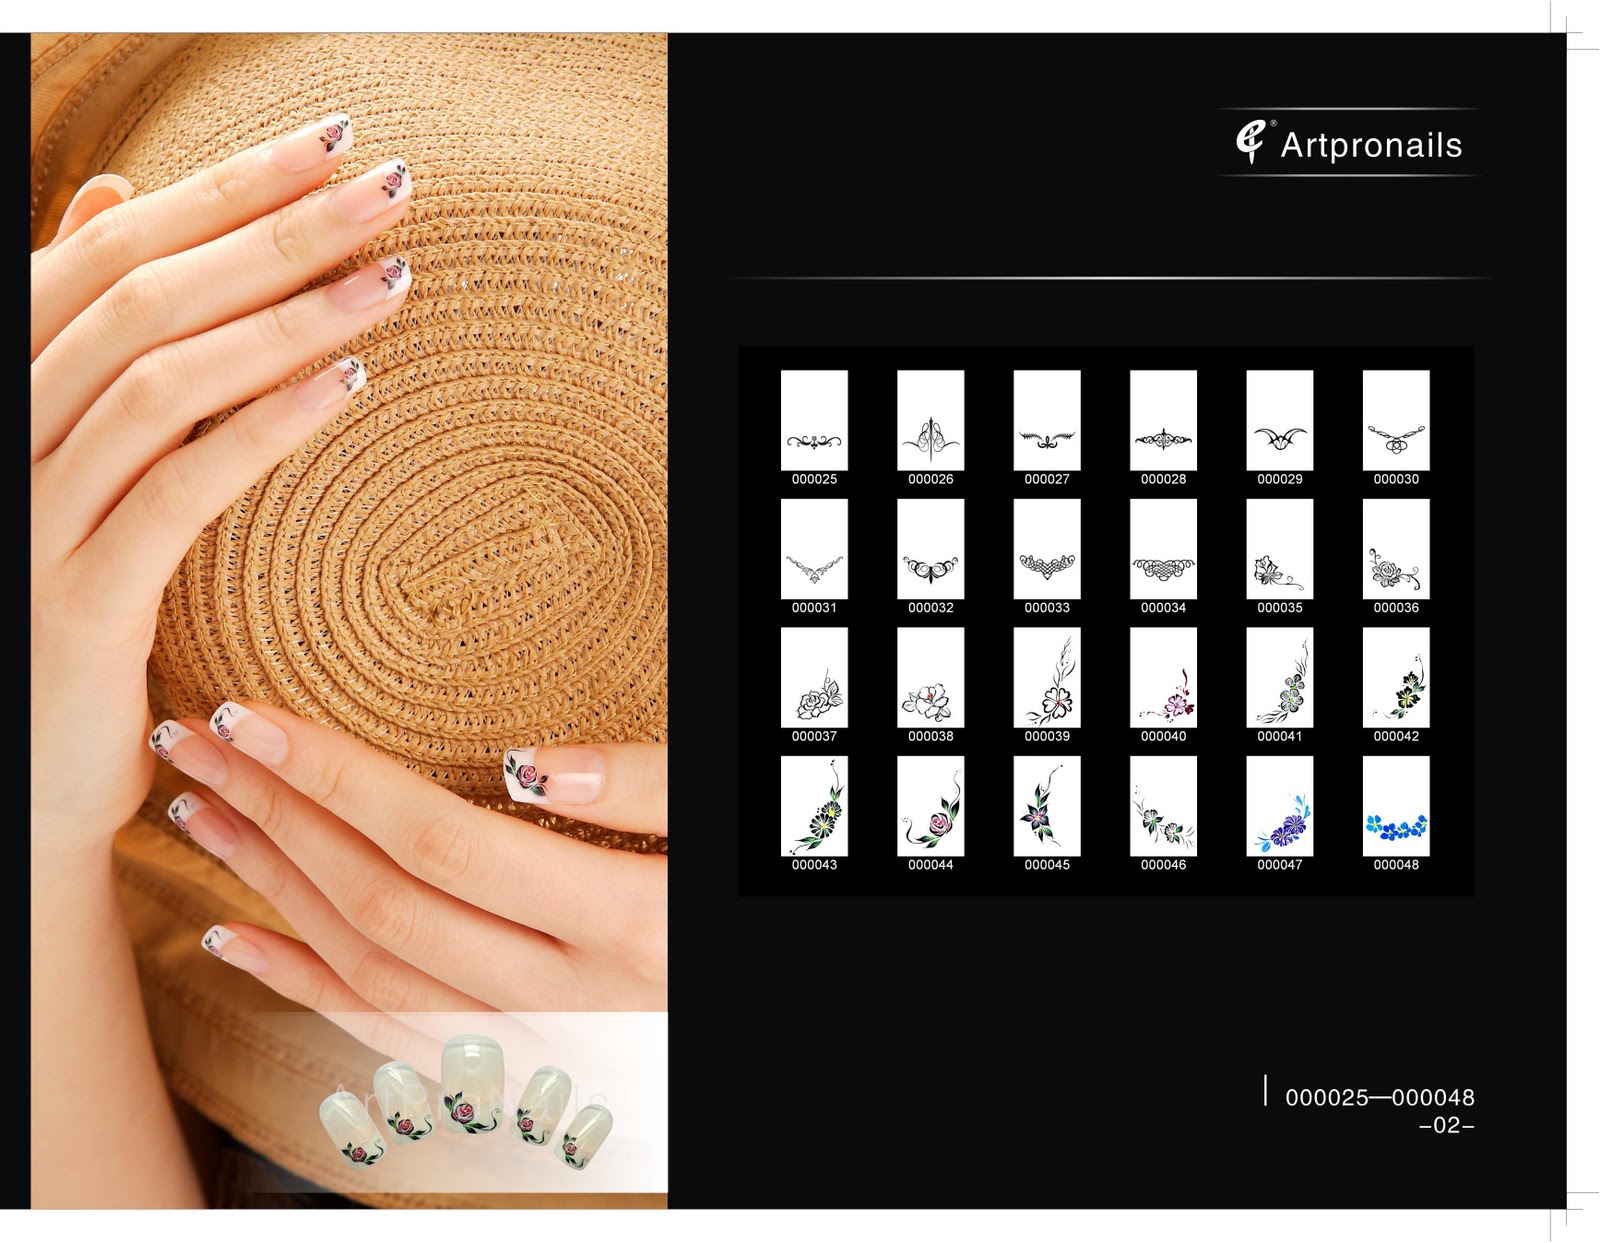 3. Nail Art Catalogs for Inspiration - wide 8